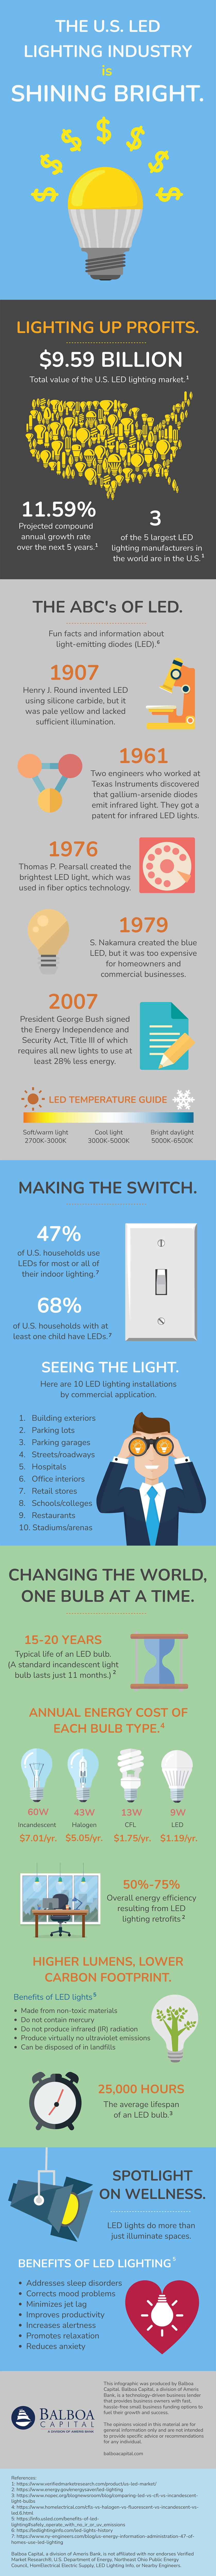 LED Lighting Industry Infographic